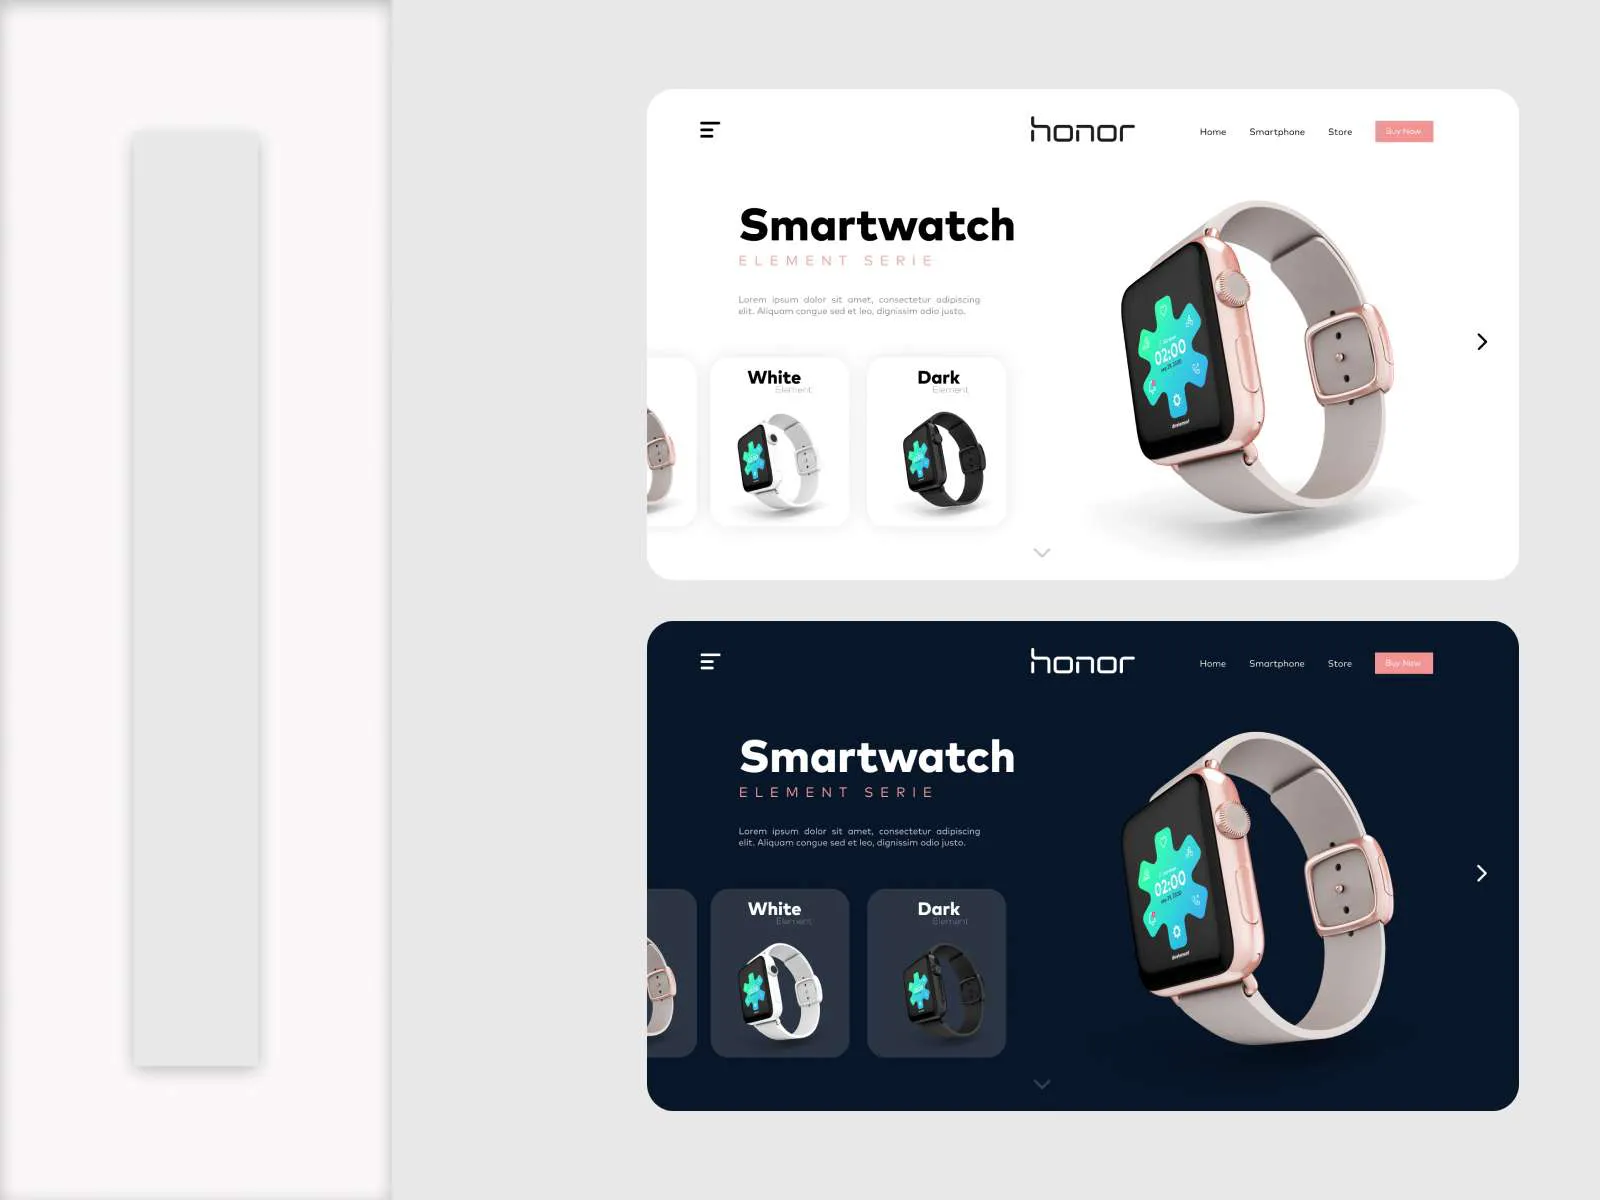 Smartwatch Concept Web for Figma and Adobe XD No 5